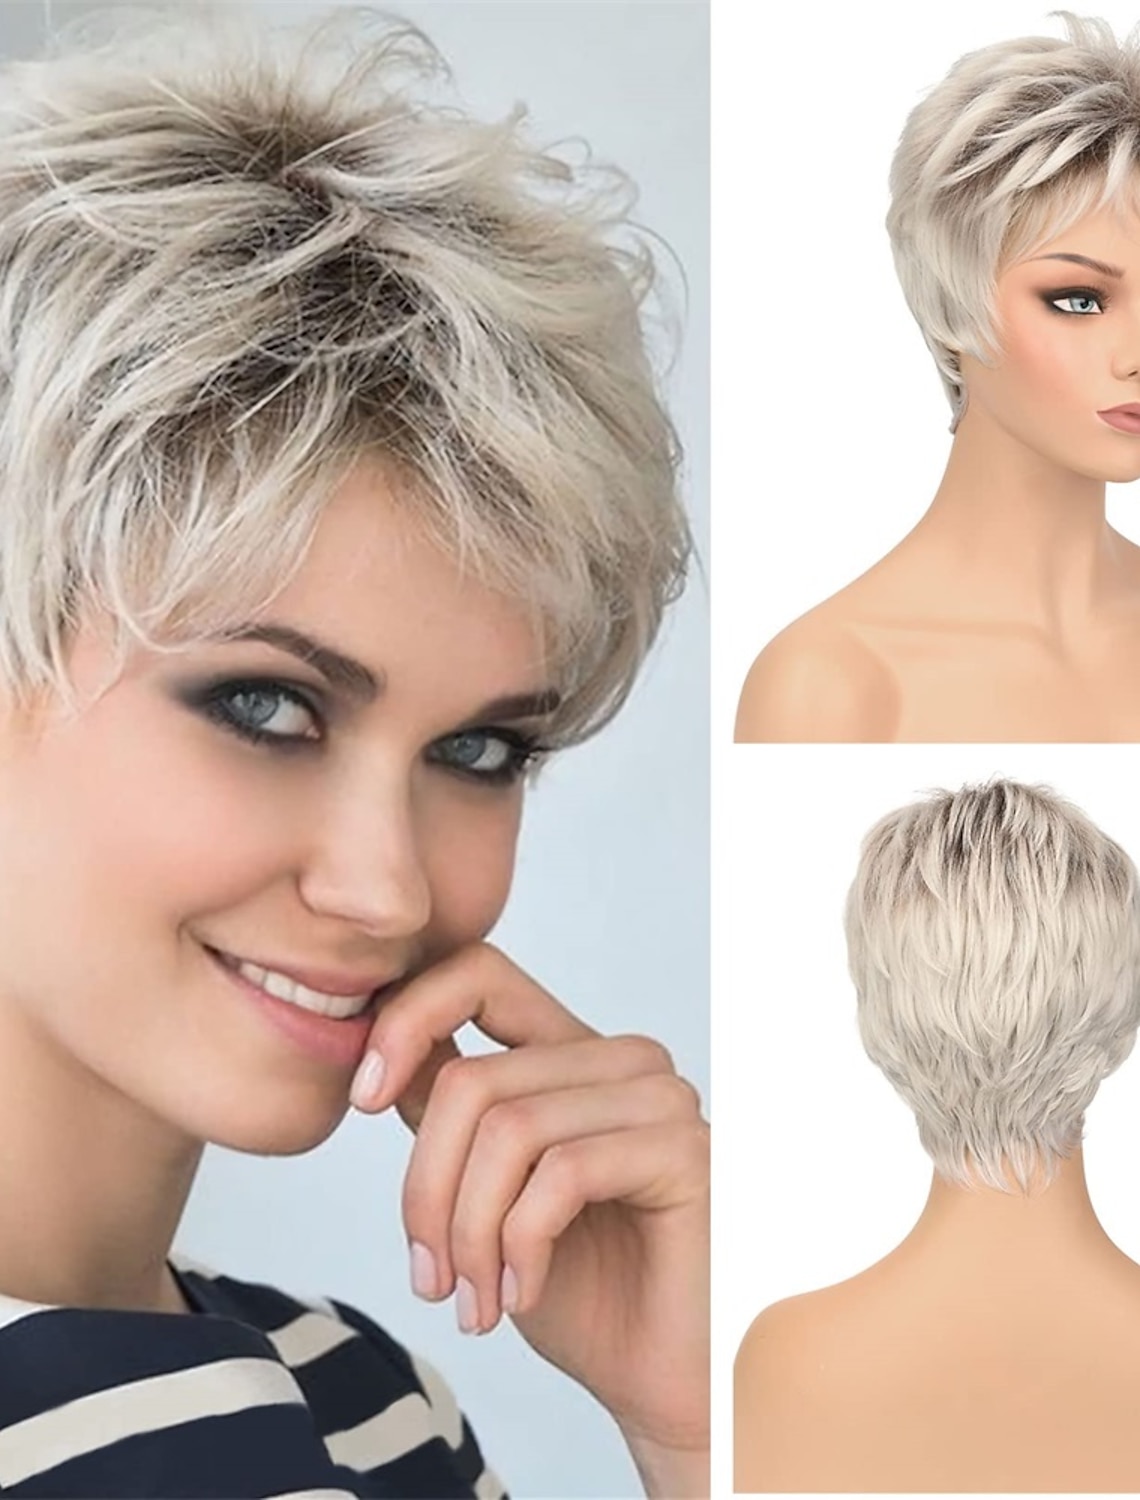 Piexie Cut Wigs for Women Short Pixie Cut Wig For White Ladies Short Hair  Wig With Bangs Free Straight Hair Synthetic Wig For Everyday Use Party  9031431 2023 – $